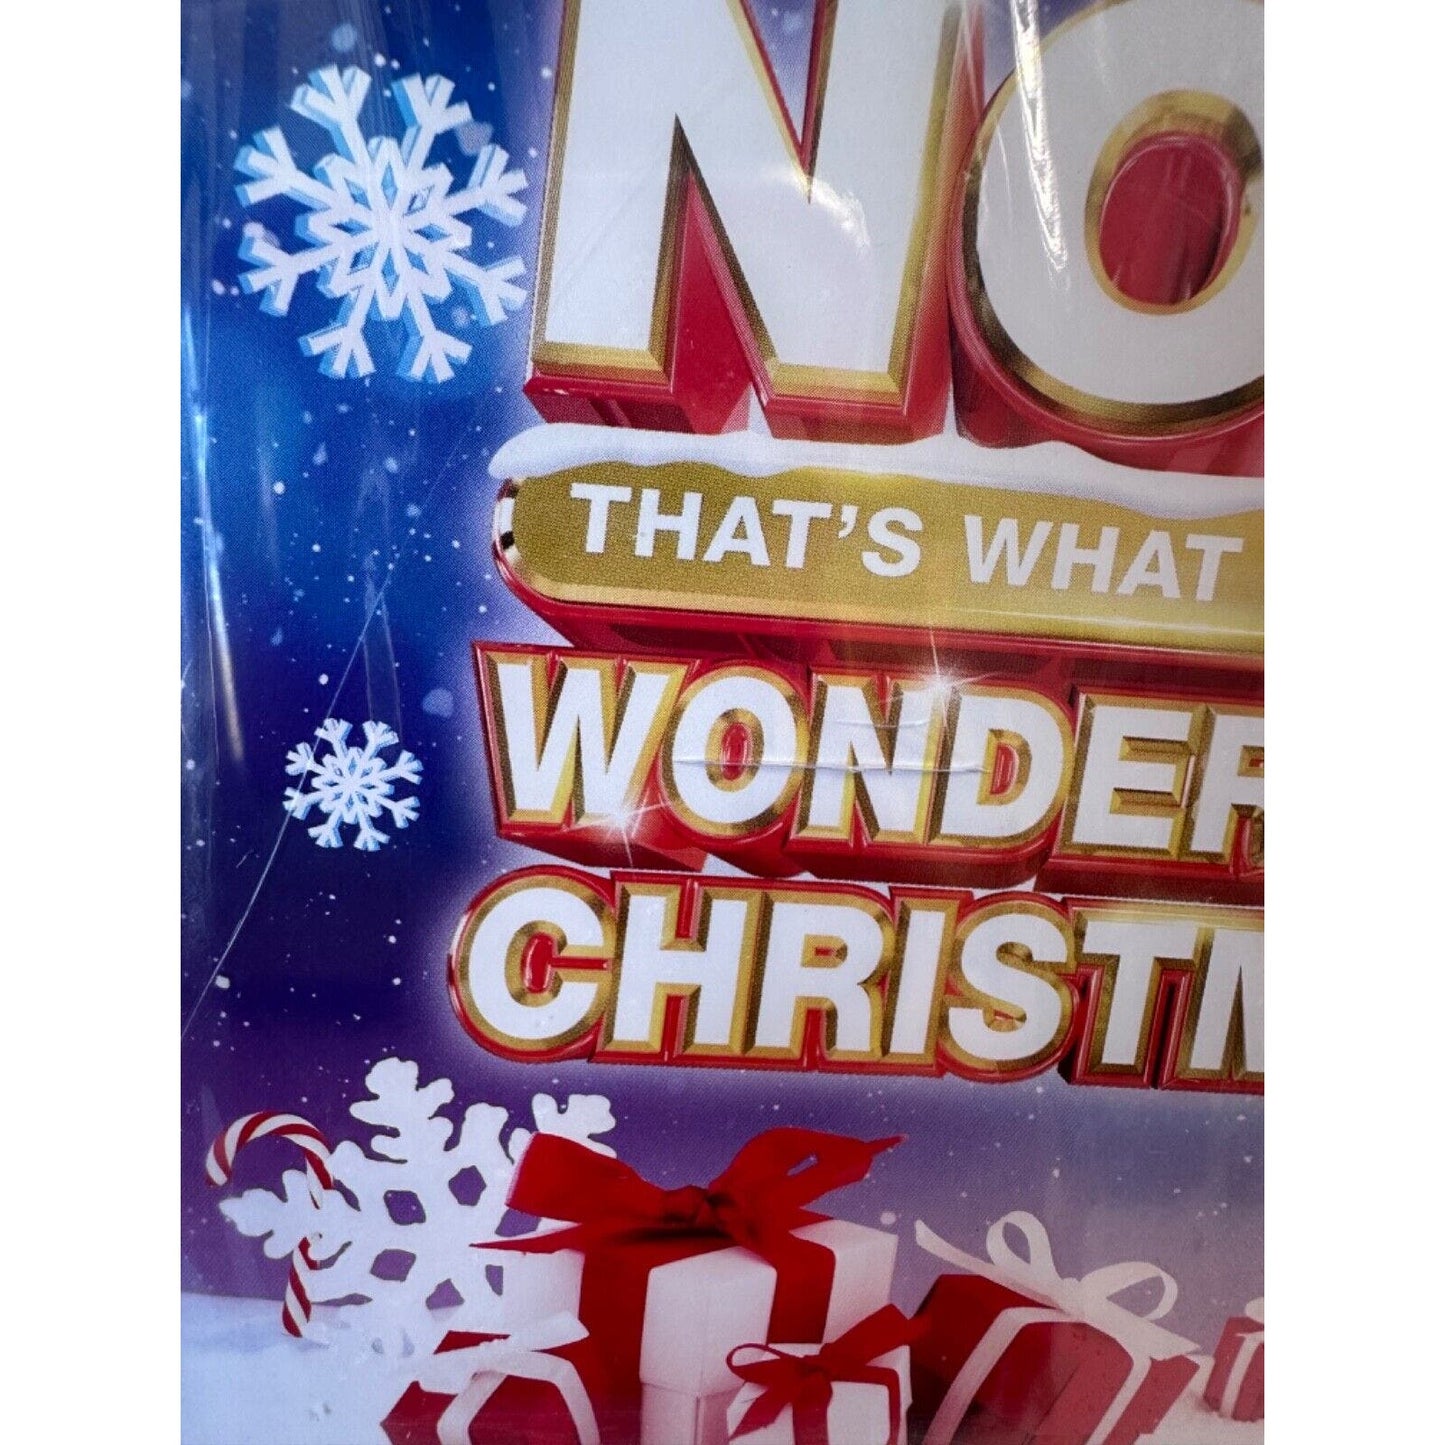 Now Wonderful Christmas (Various Artists) by Various Artists CD- Cracked Case